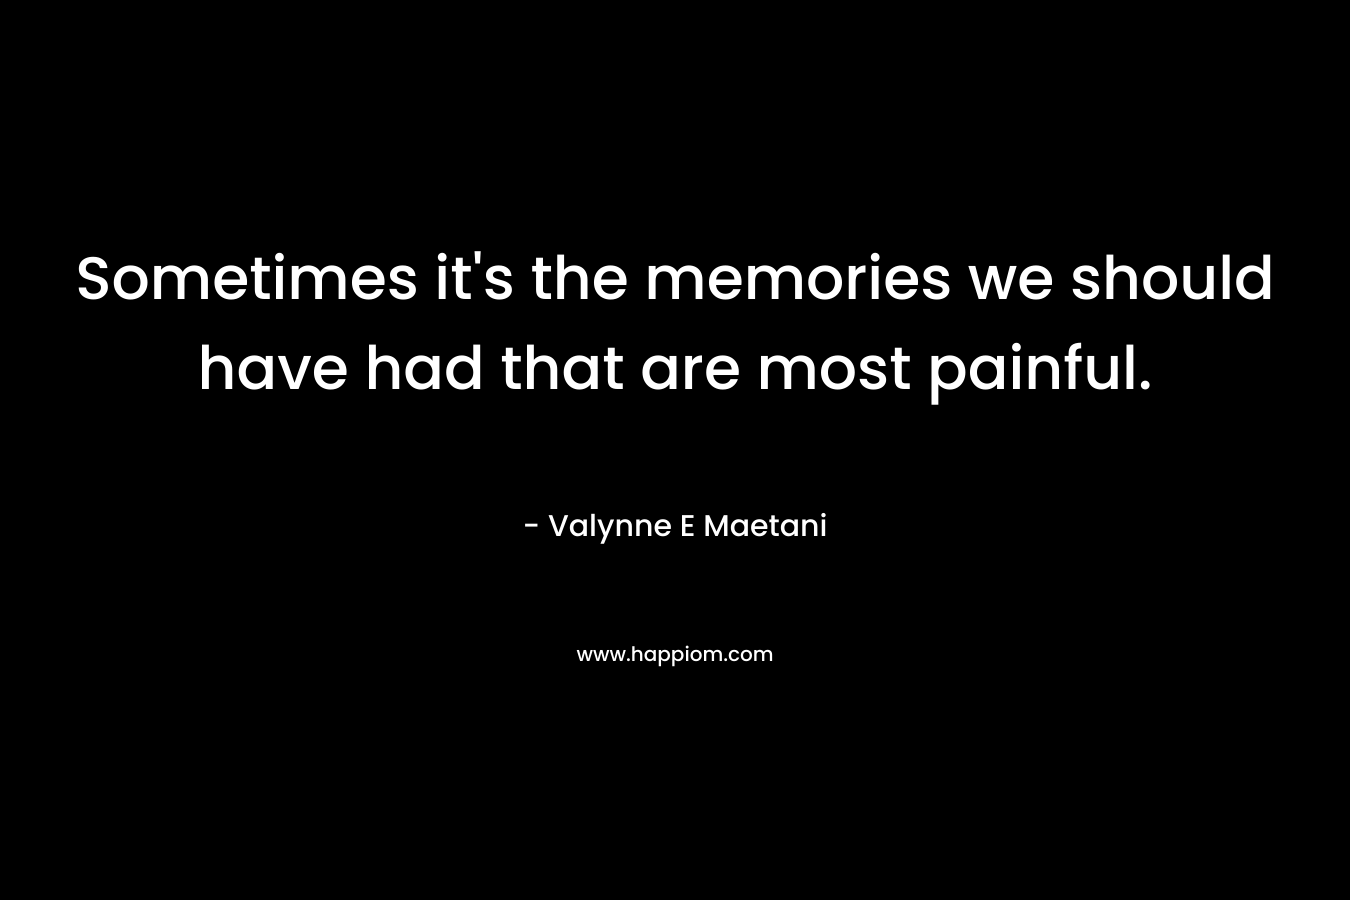 Sometimes it's the memories we should have had that are most painful.